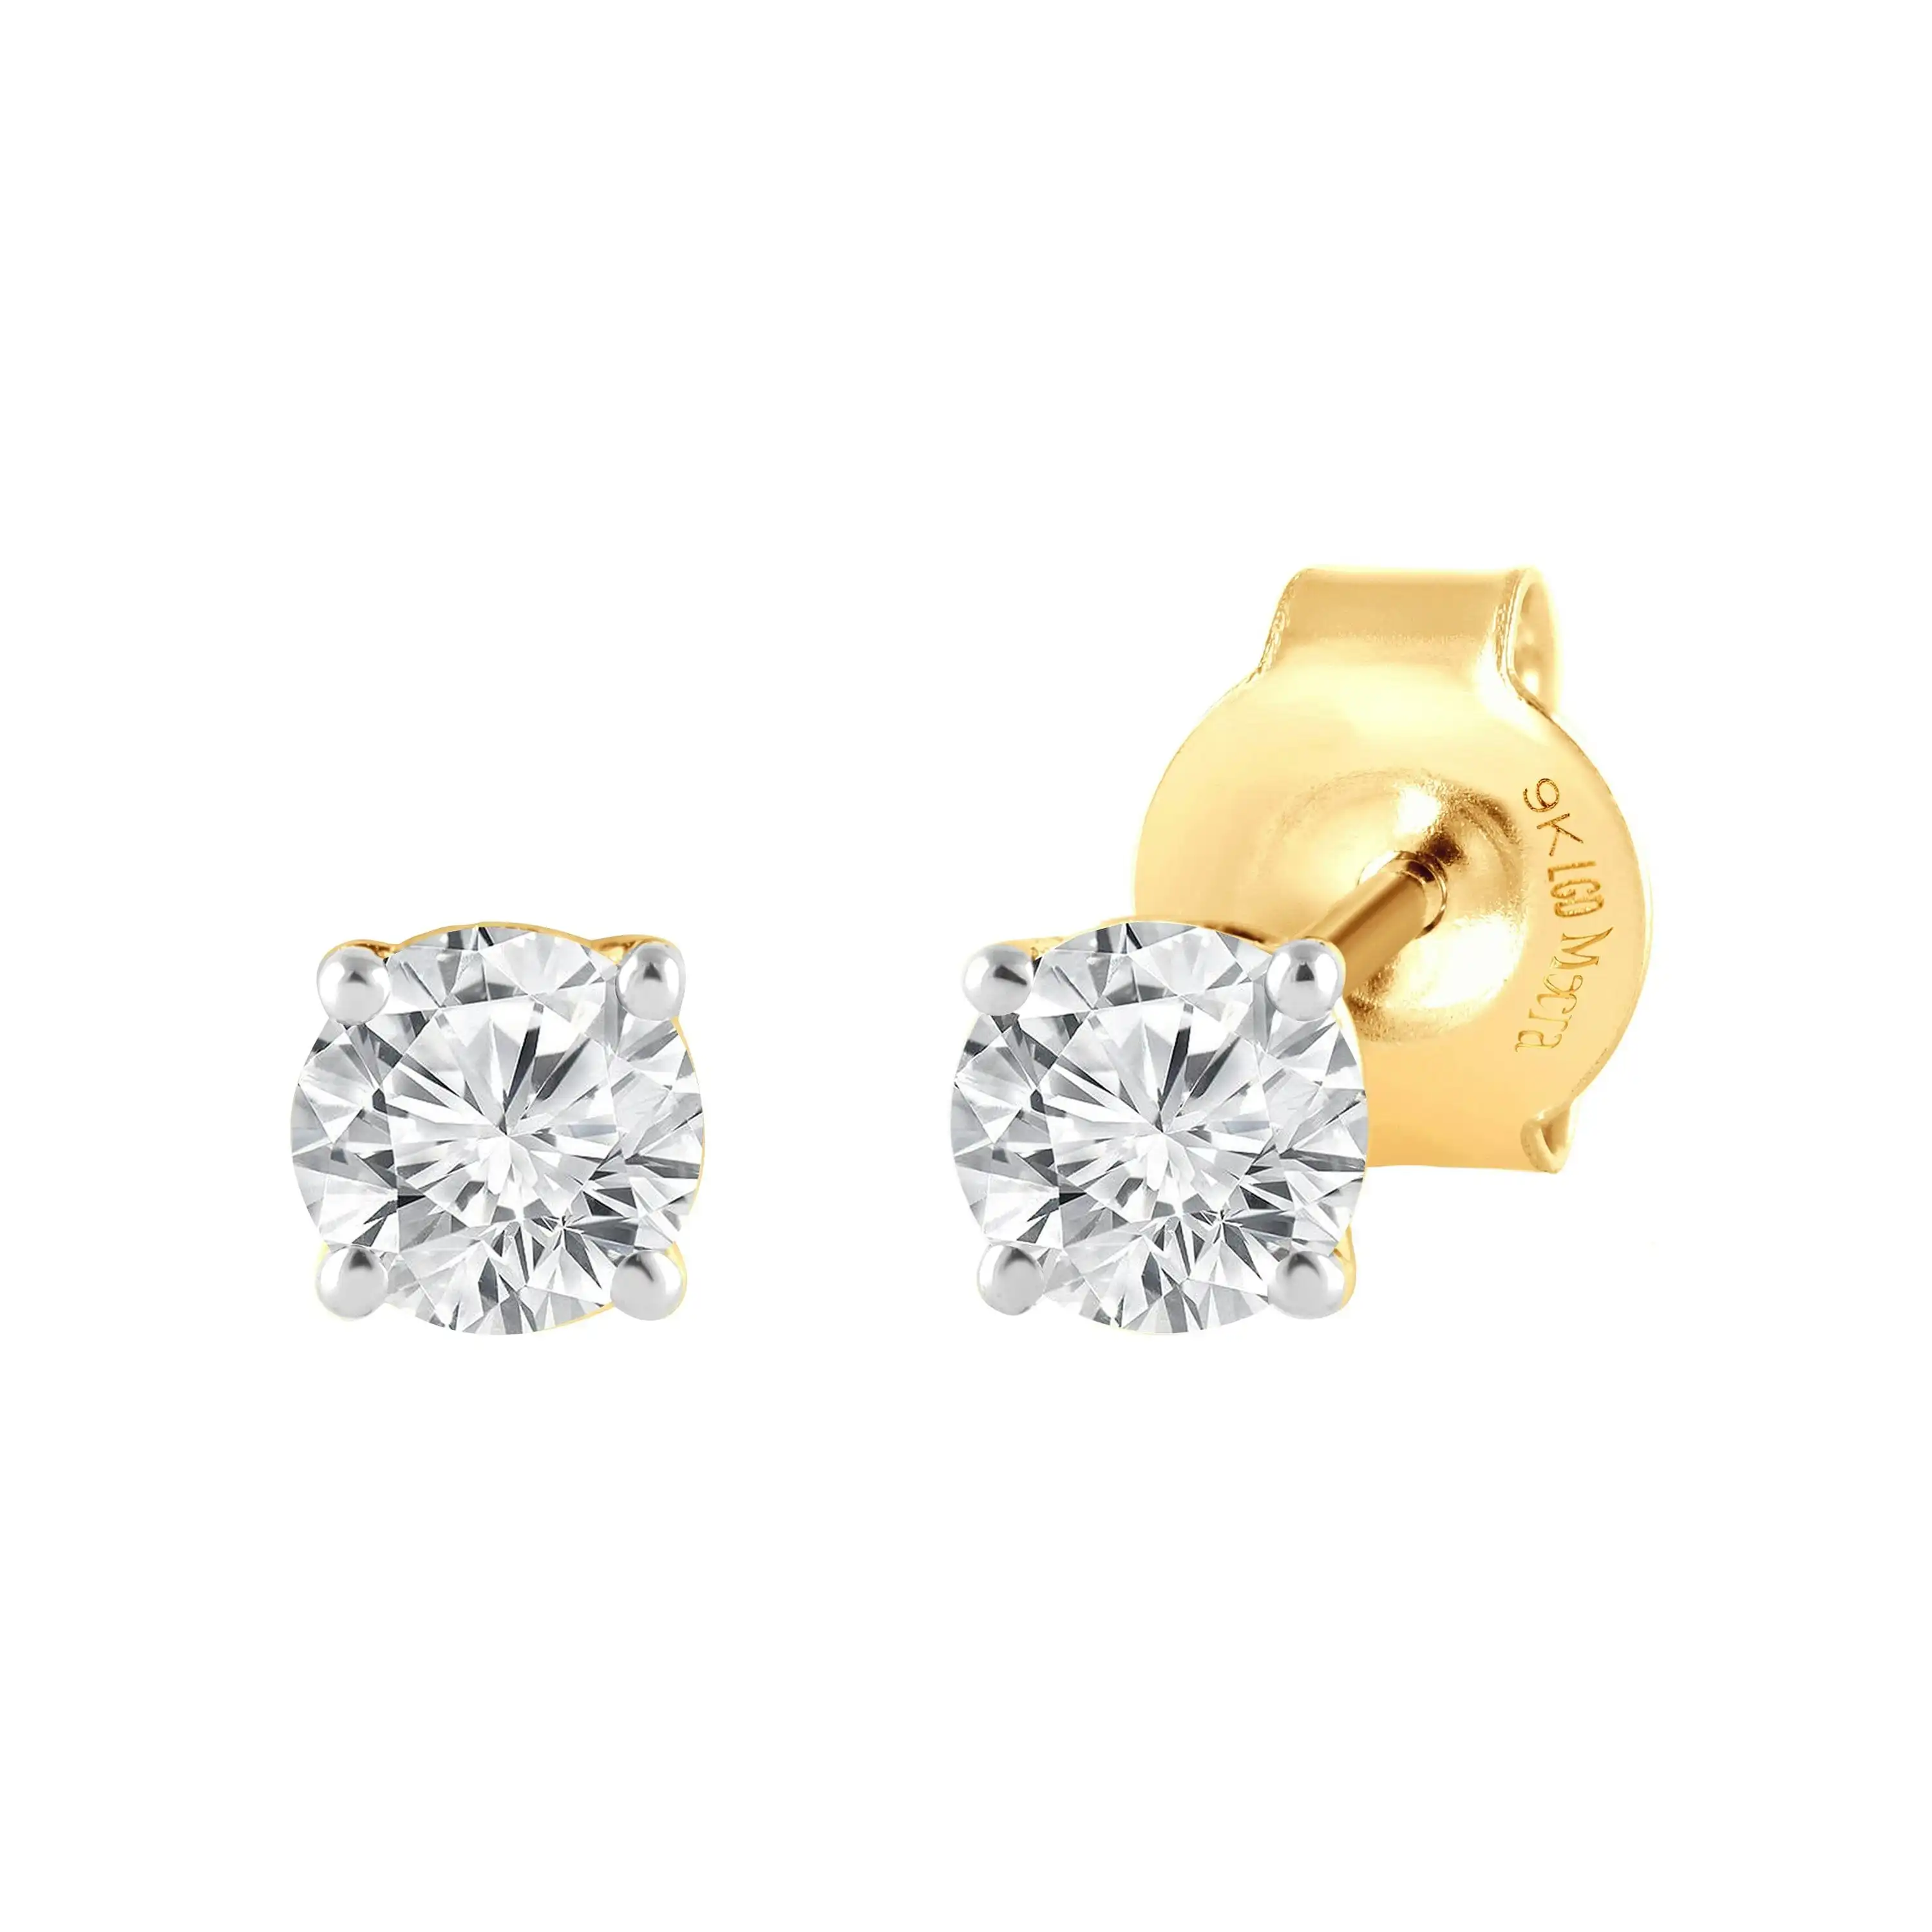 Meera 1/5ct Laboratory Grown Solitaire Diamond Earrings in 9ct Yellow Gold